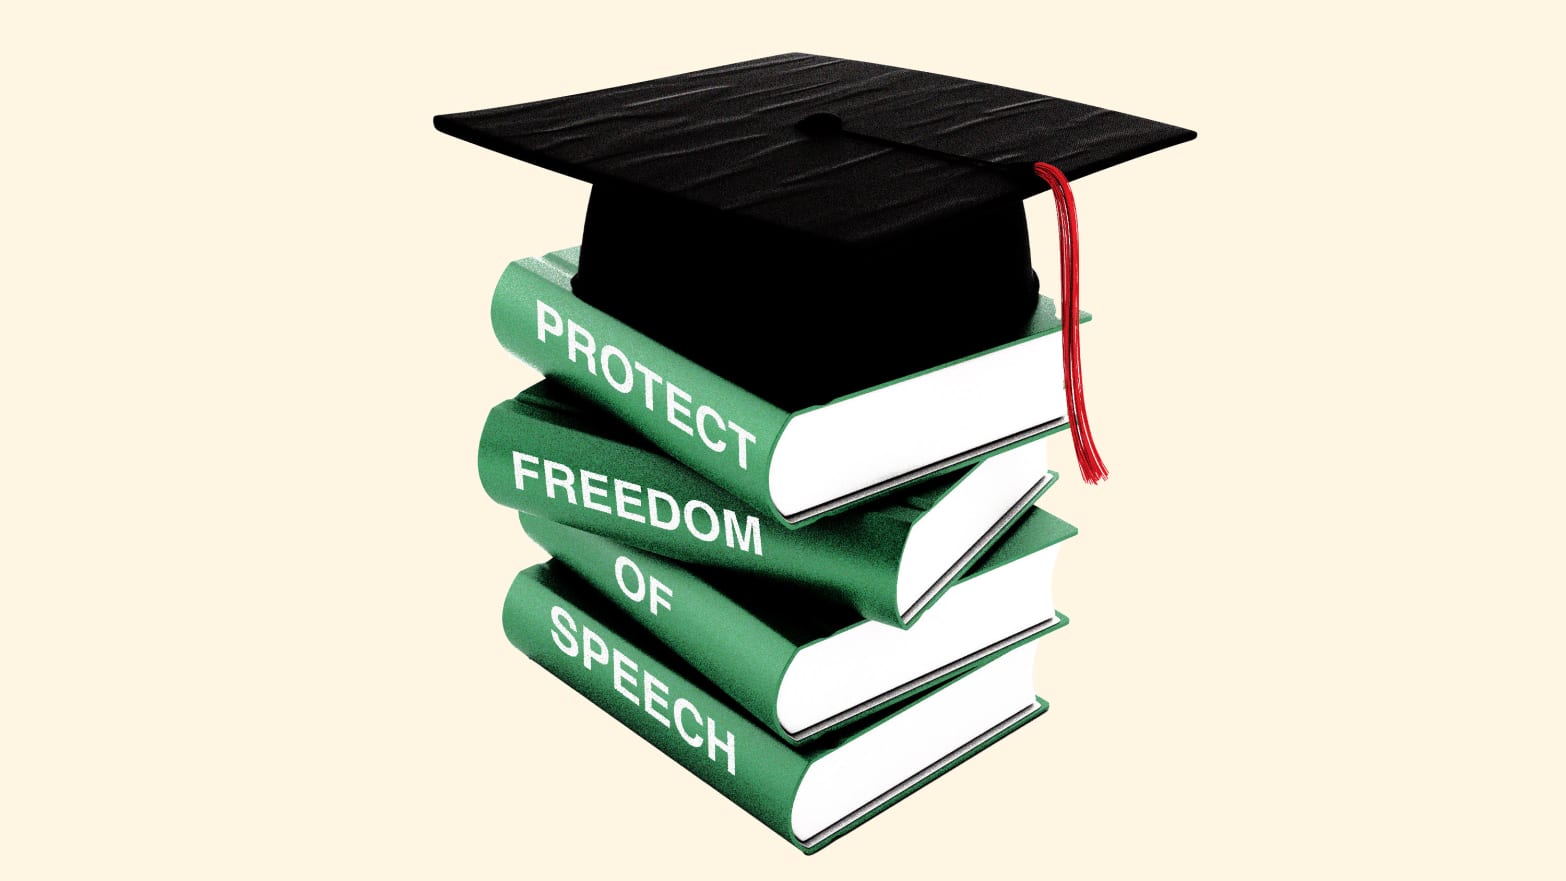 An illustration that includes a College Graduation Cap and a stack of Books